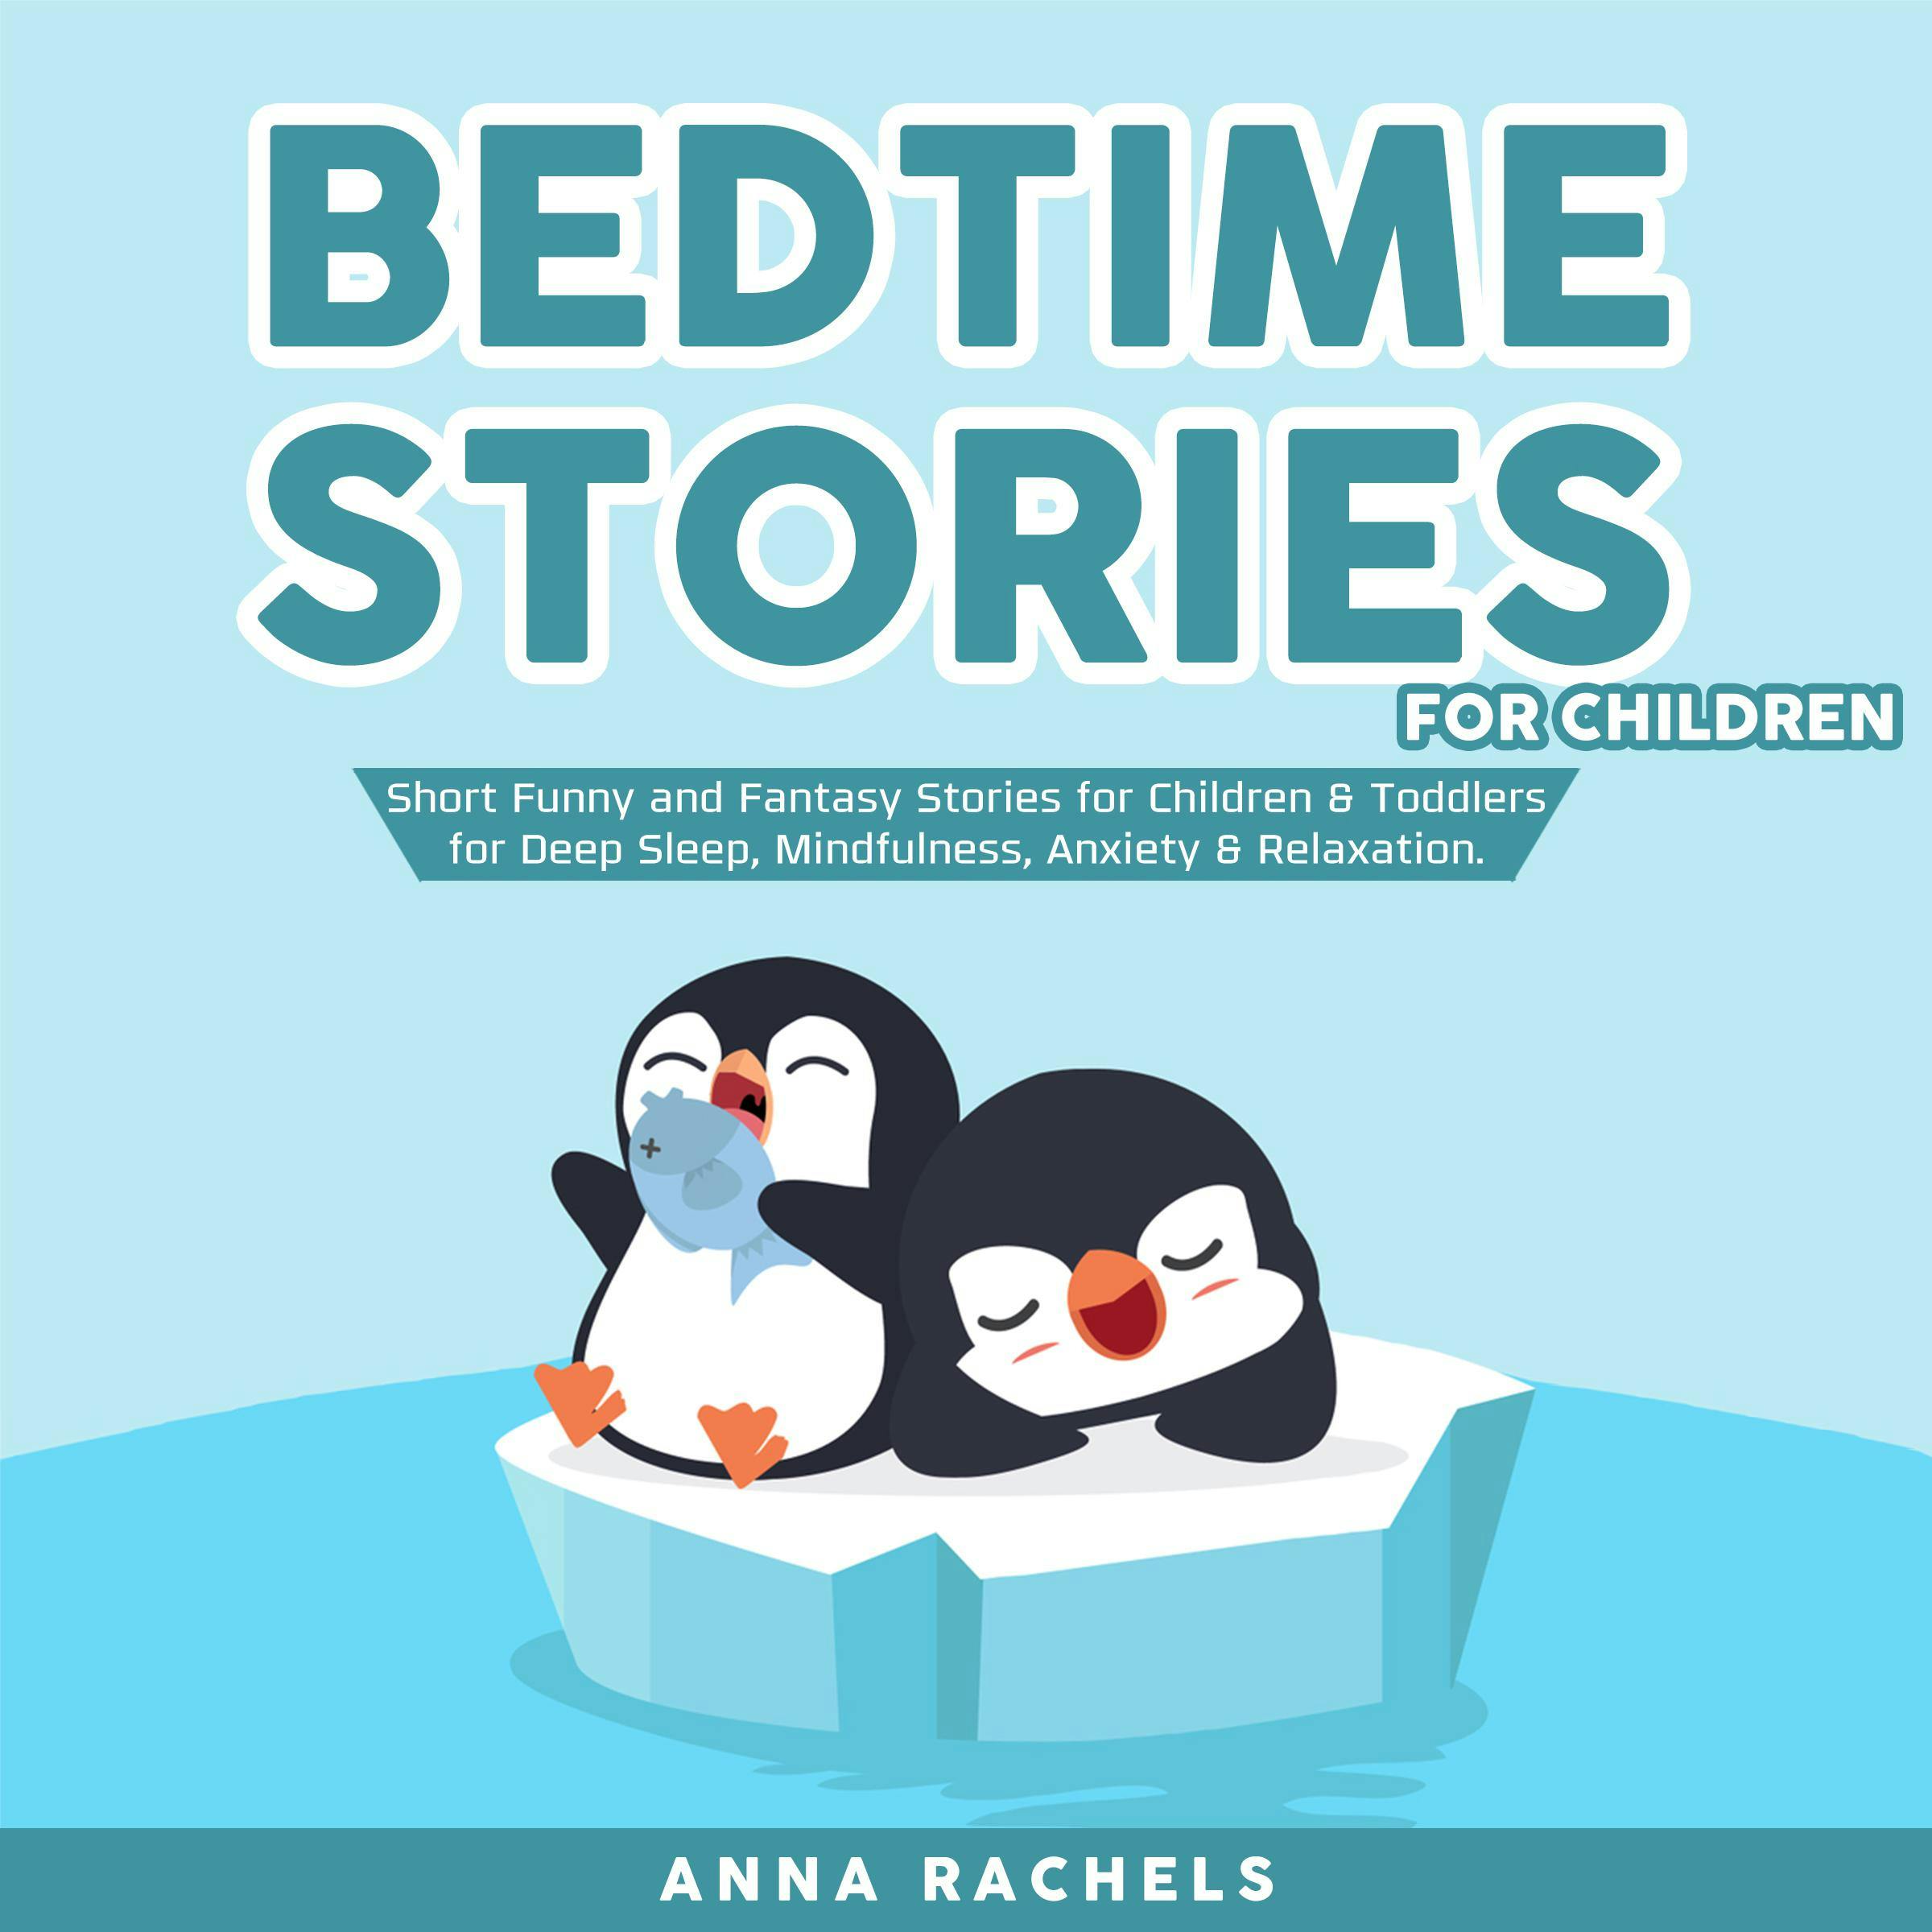 Bedtime Stories for Children: Short Funny and Fantasy Stories for Children & Toddlers for Deep Sleep, Mindfulness, Anxiety & Relaxation. - Anna Rachels